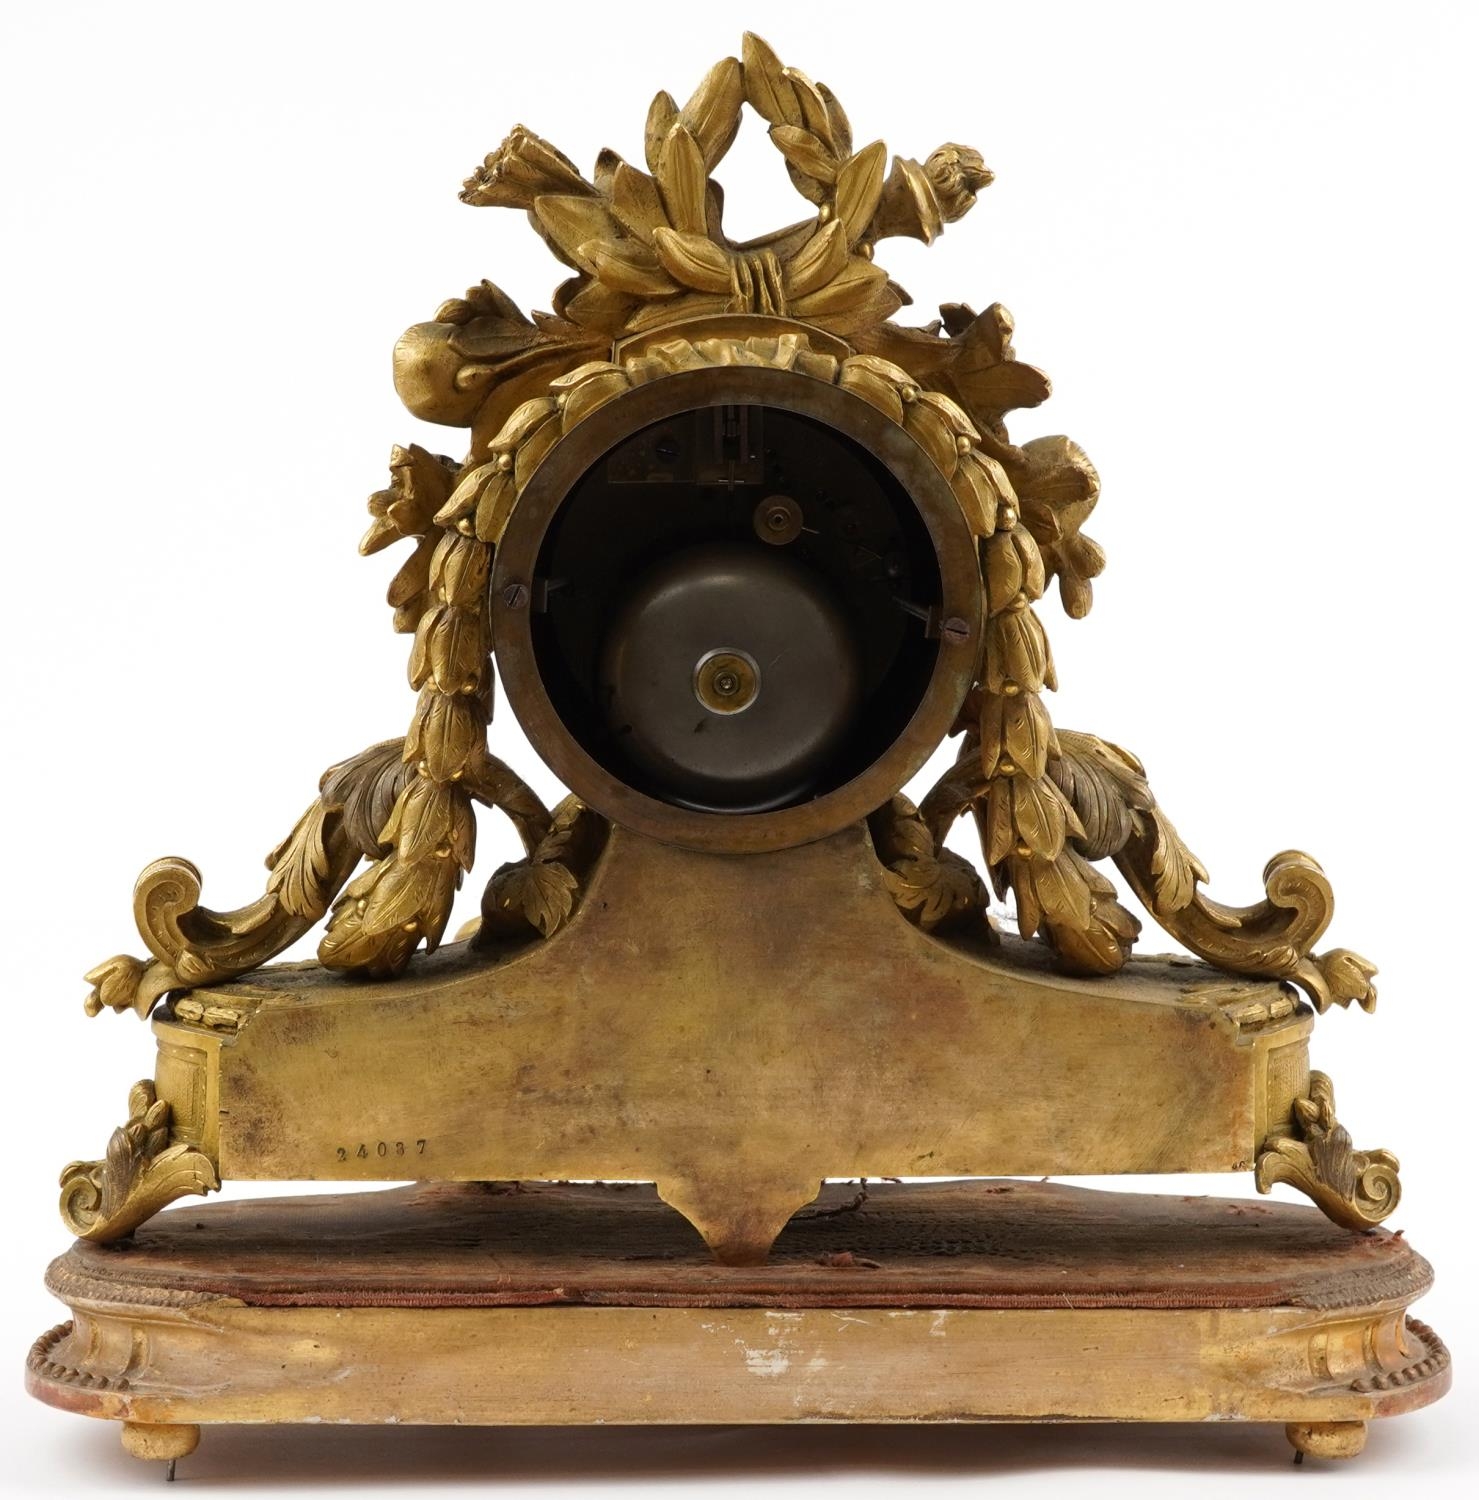 Drocourt of Paris, 19th century French ormolu mantle clock striking on a bell,cast with torches - Image 3 of 5